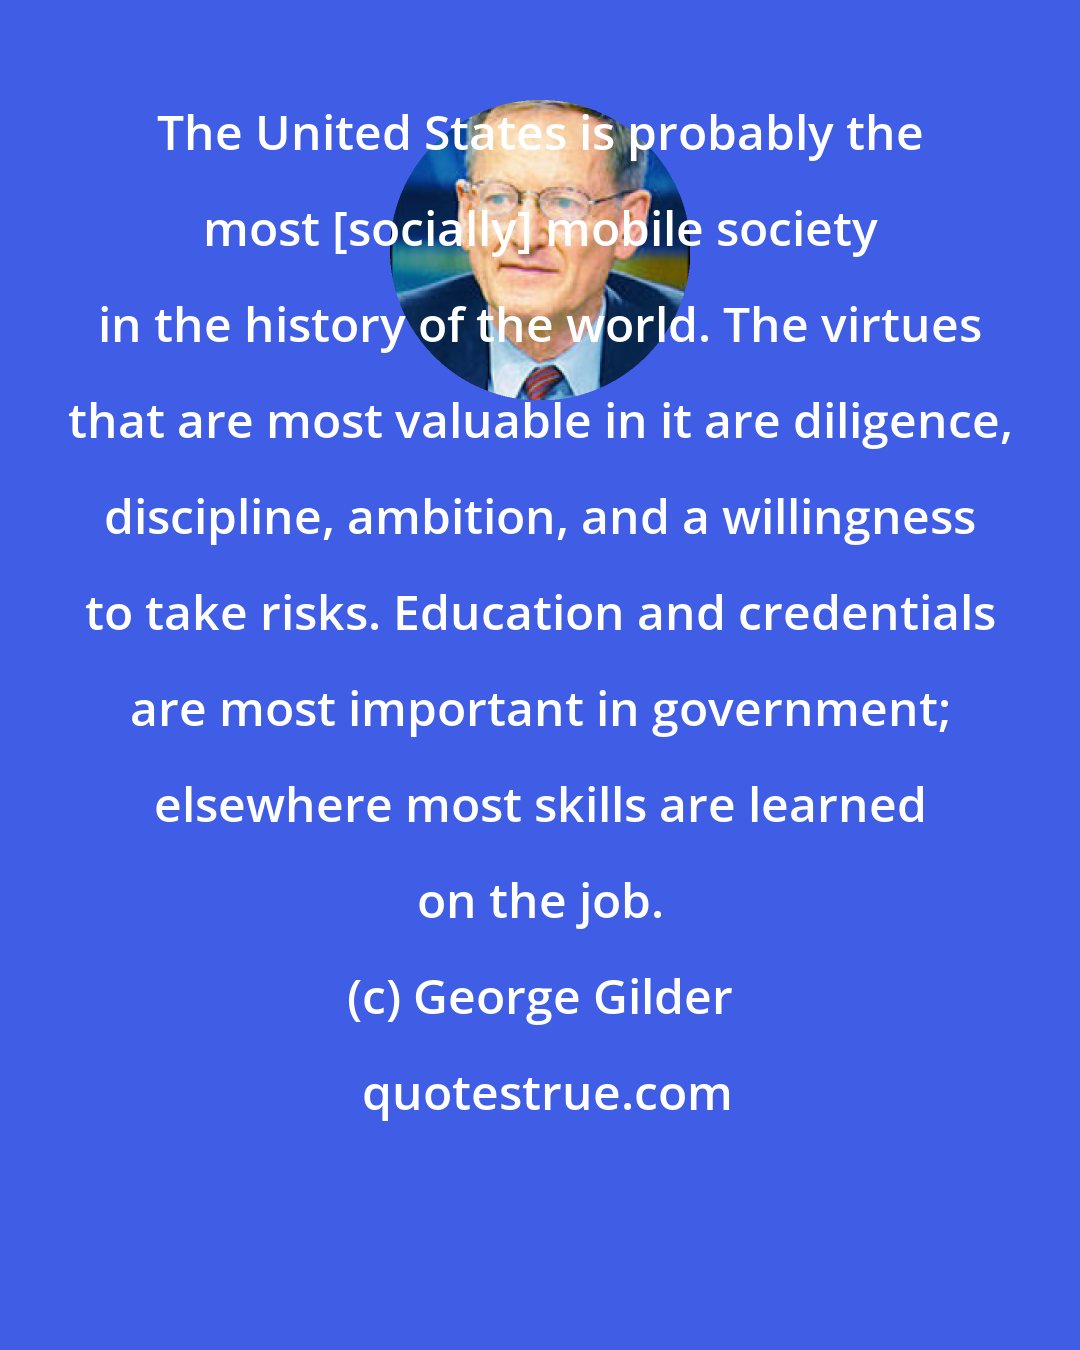 George Gilder: The United States is probably the most [socially] mobile society in the history of the world. The virtues that are most valuable in it are diligence, discipline, ambition, and a willingness to take risks. Education and credentials are most important in government; elsewhere most skills are learned on the job.